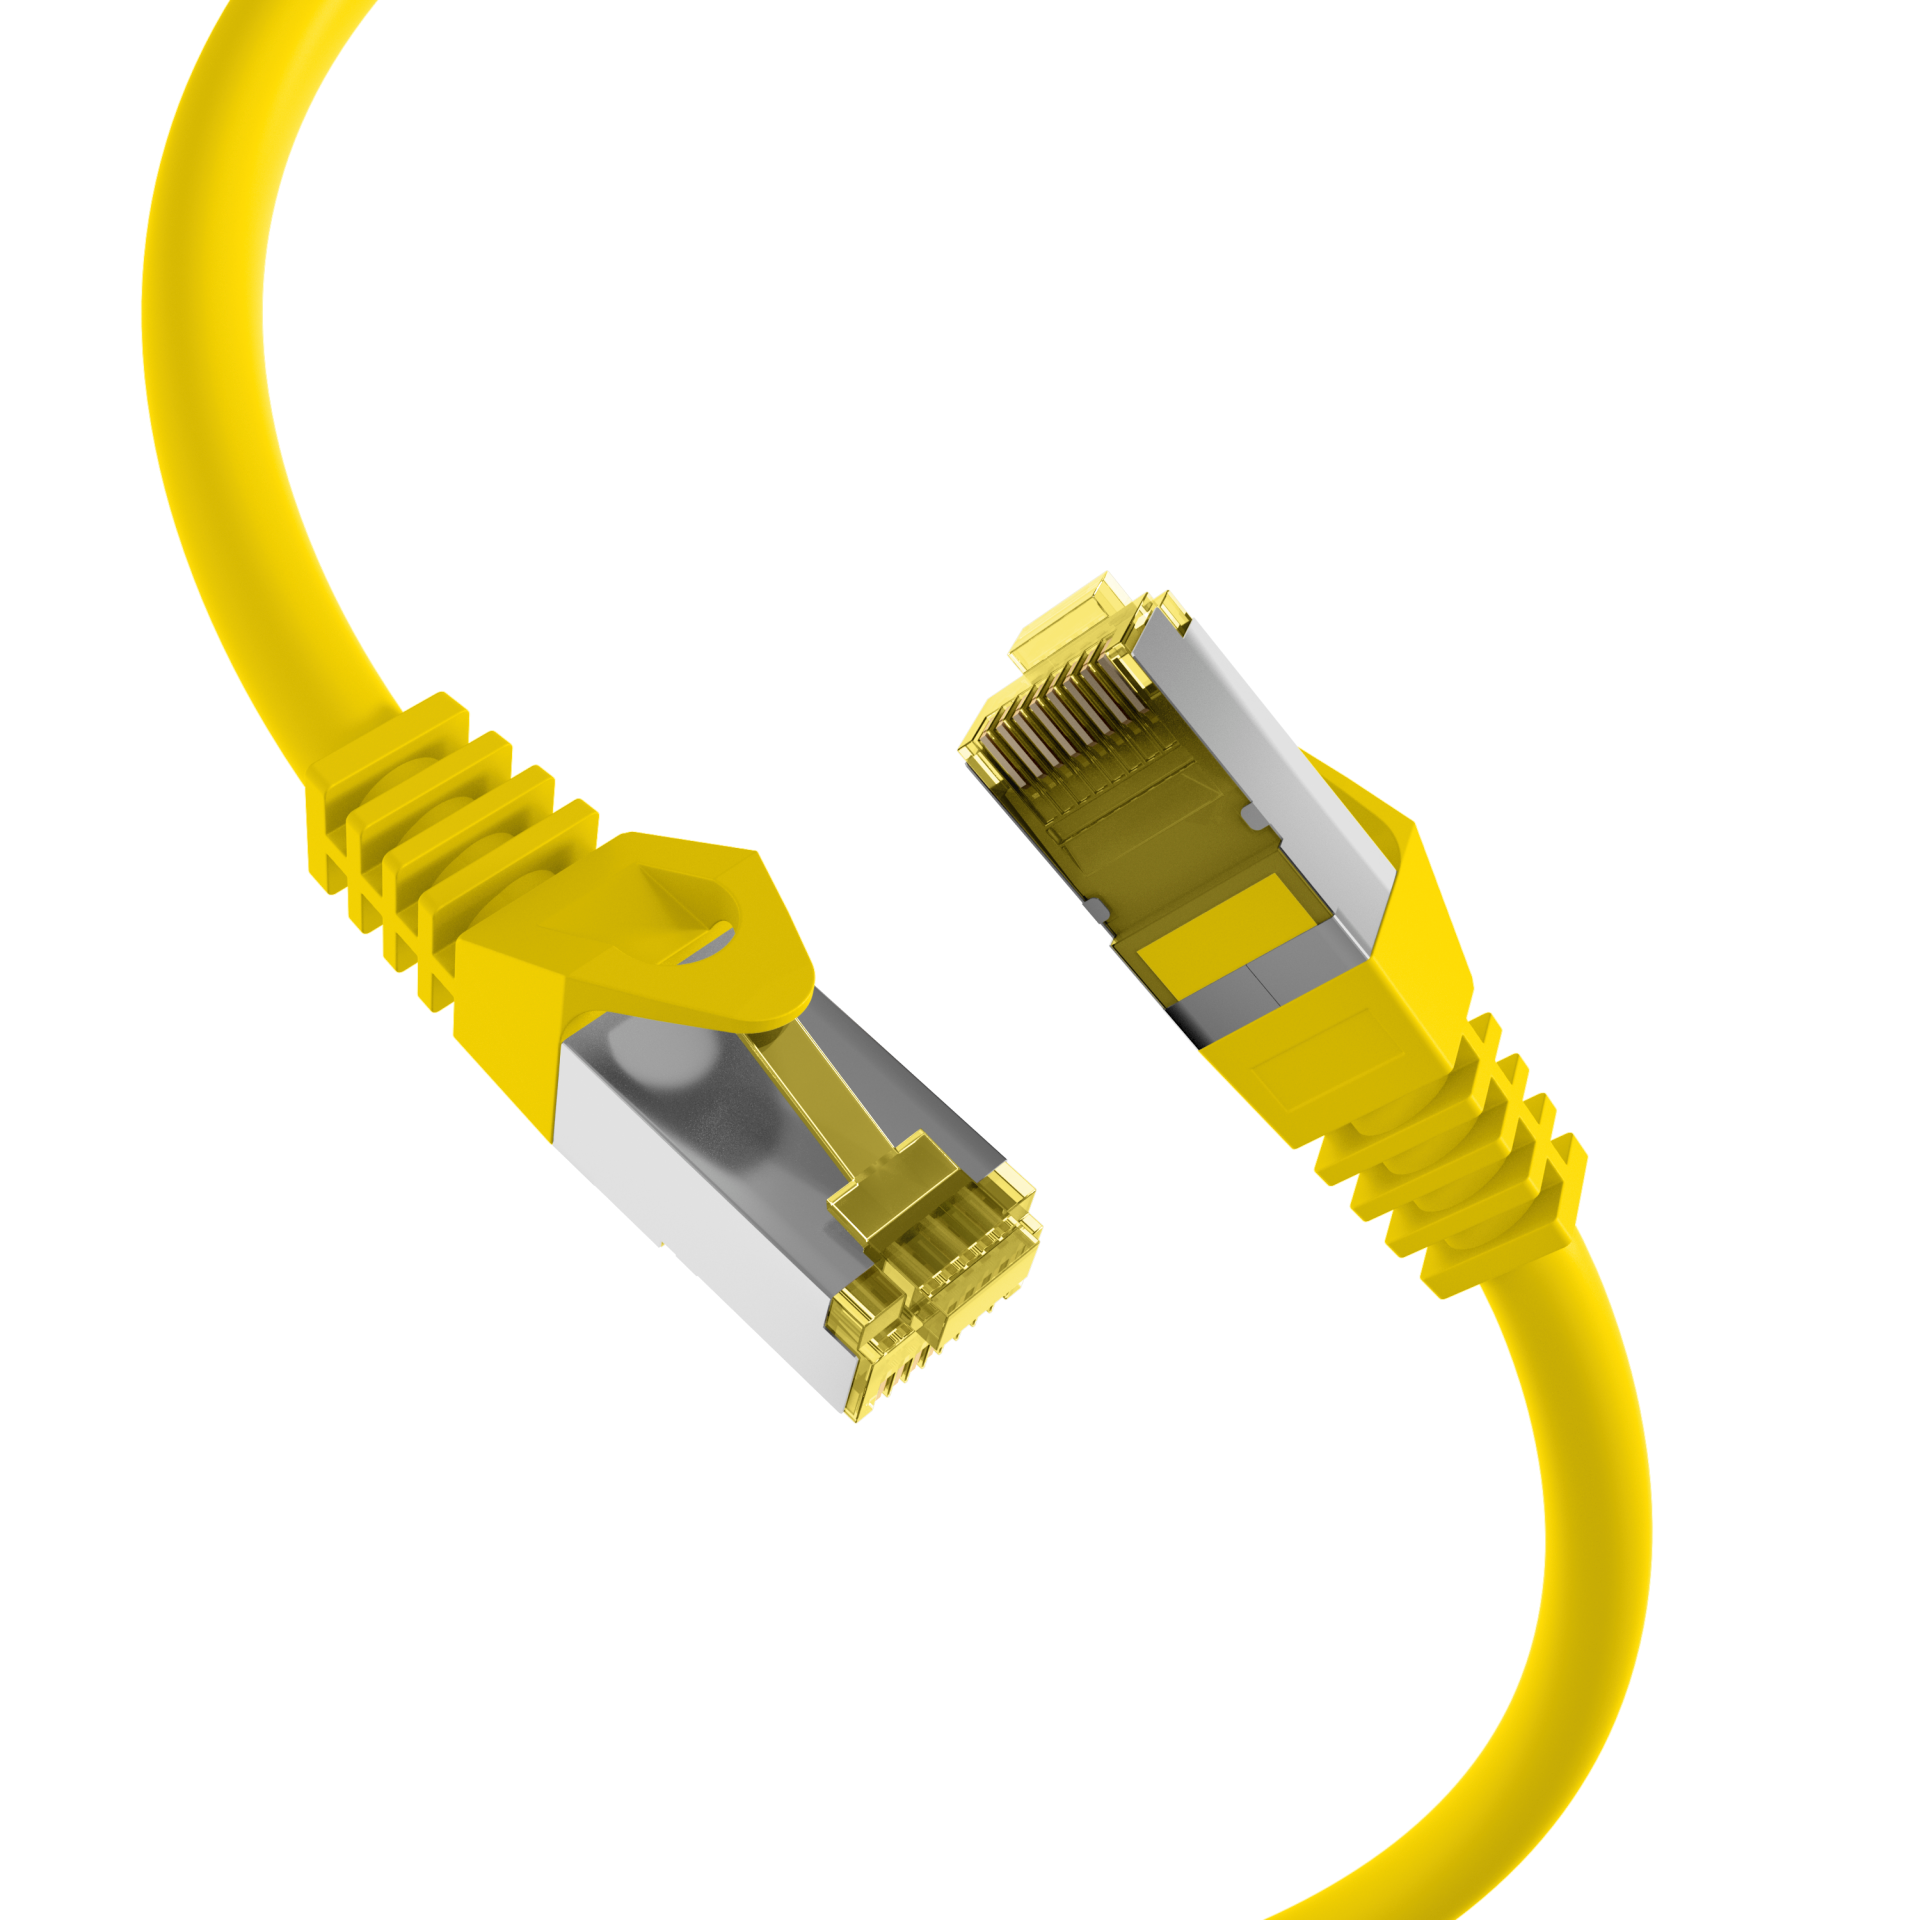 RJ45 Patch cable S/FTP, Cat.6A, LSZH, Cat.7 Raw cable, 0,15m, yellow